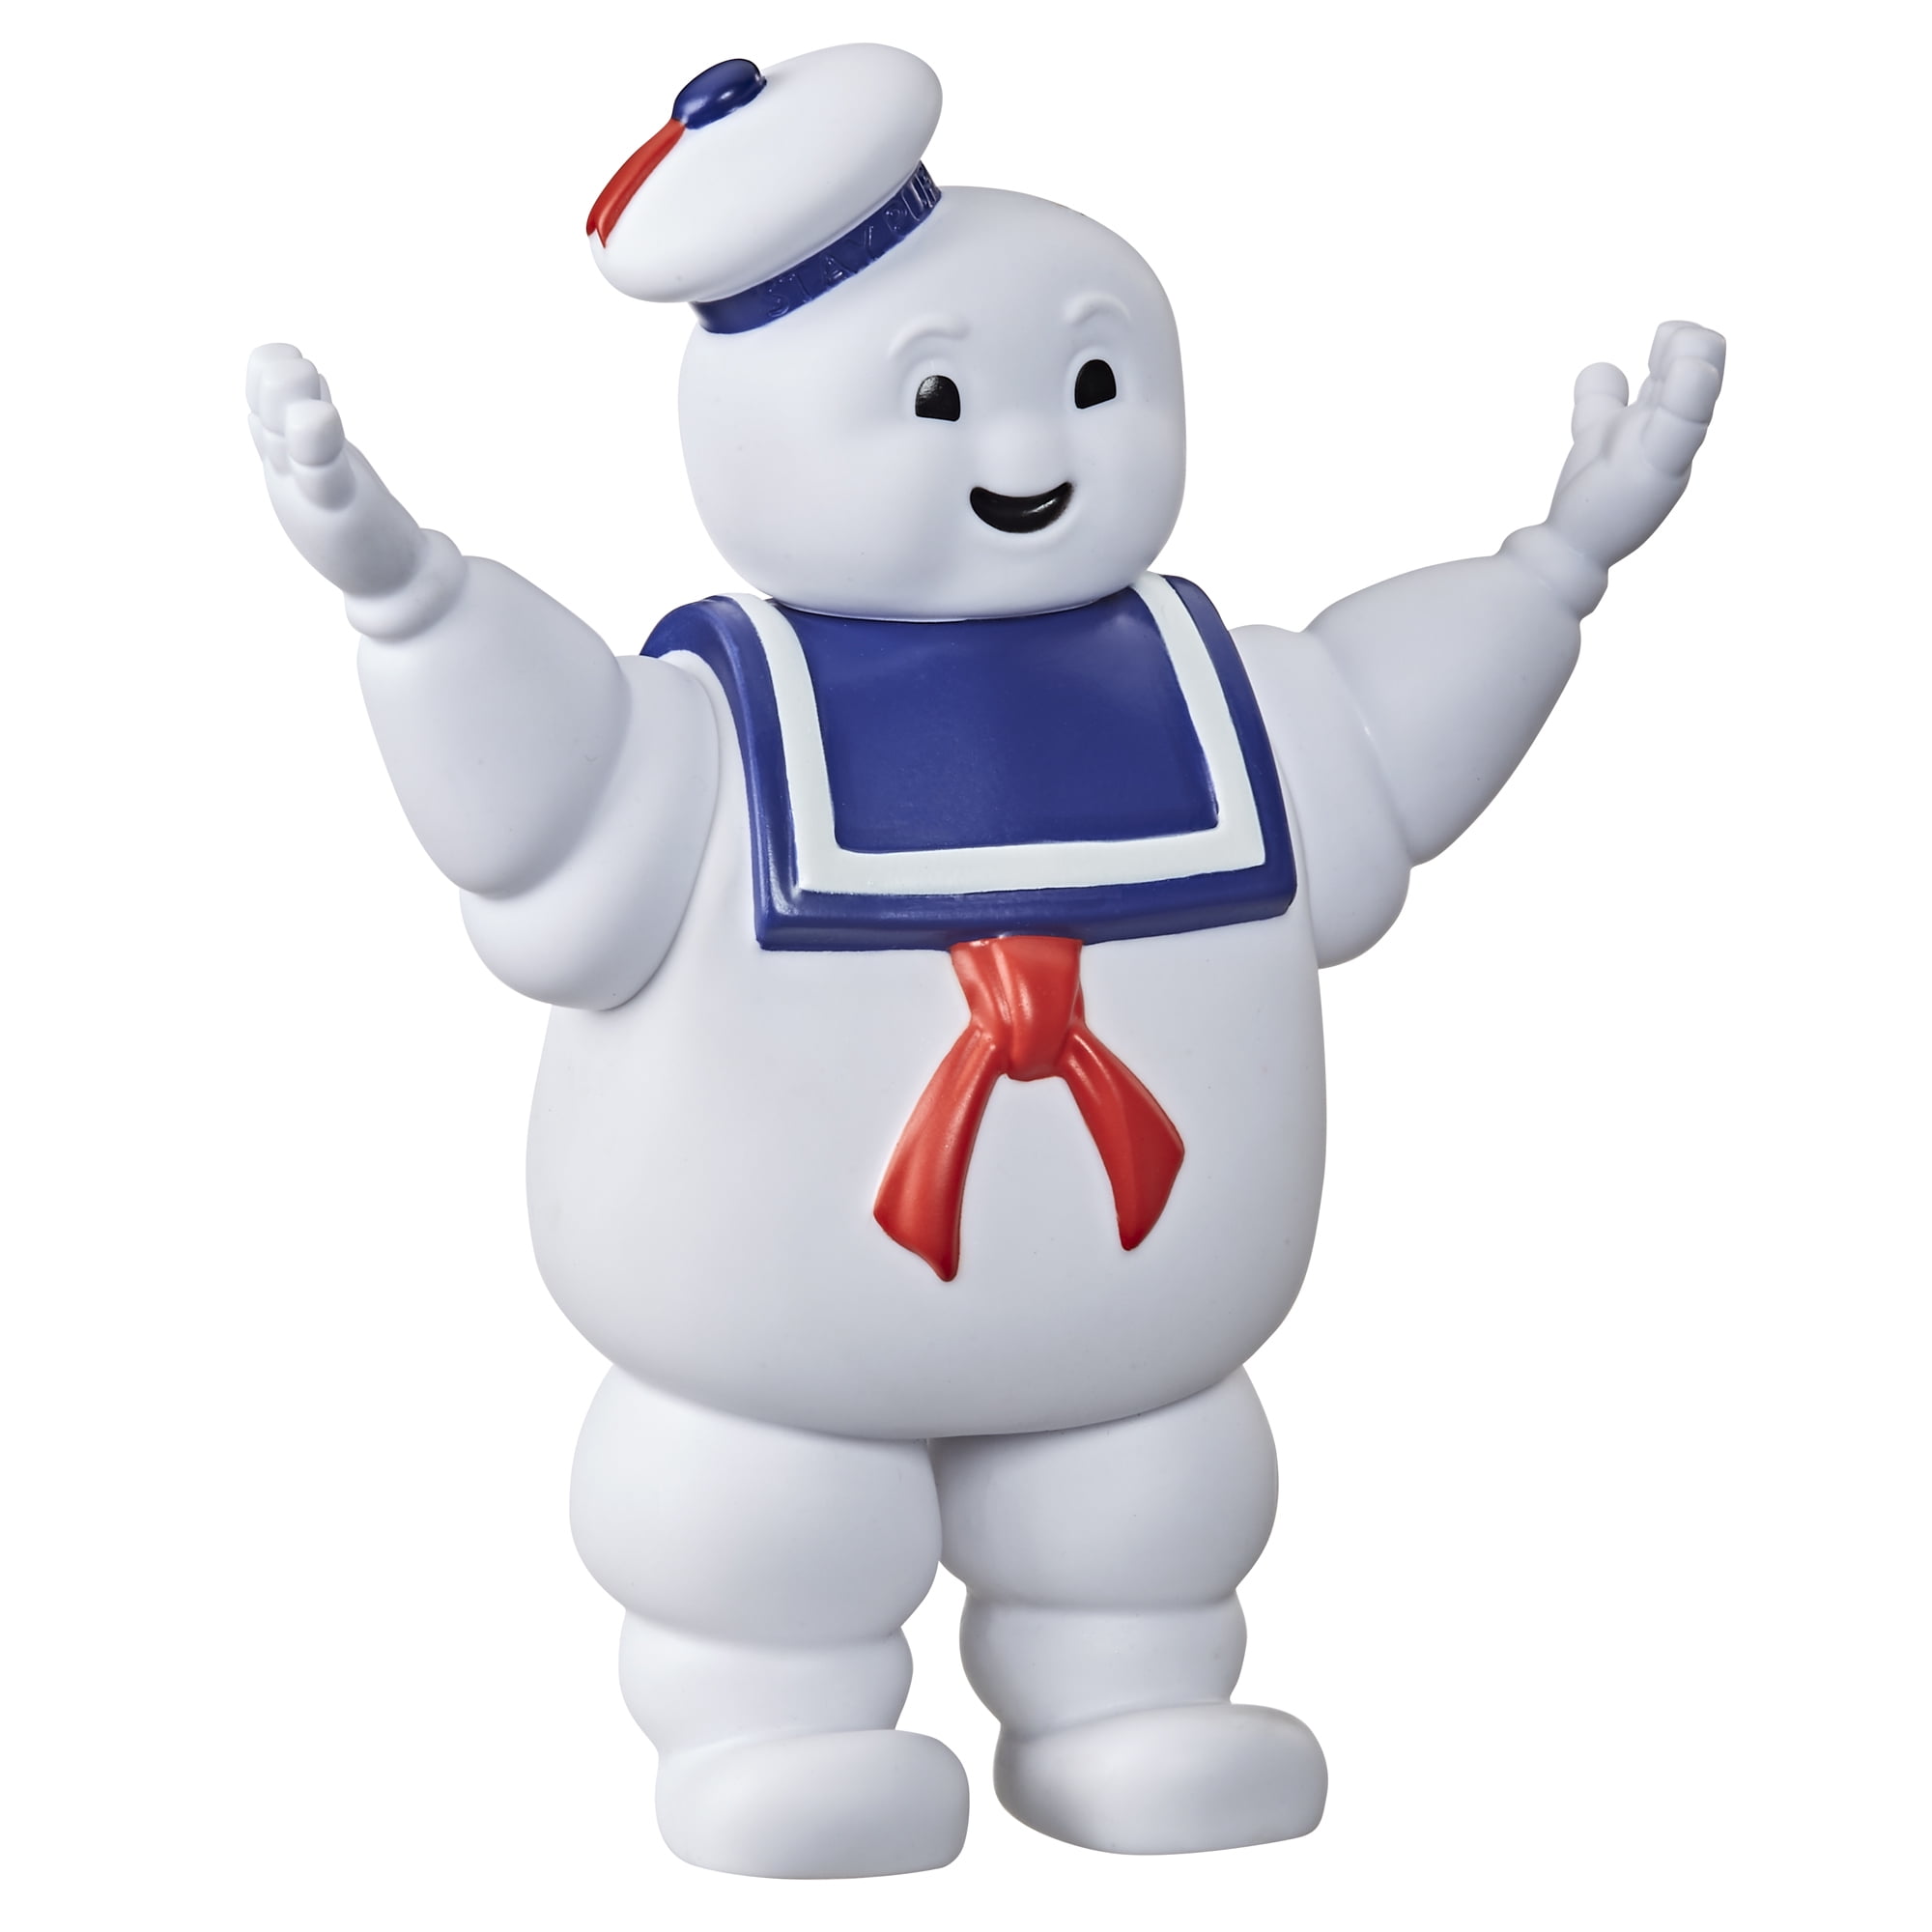 Classic Ghostbusters 4 inch Talking Smiling Stay Puft Marshmallow Man Plush...